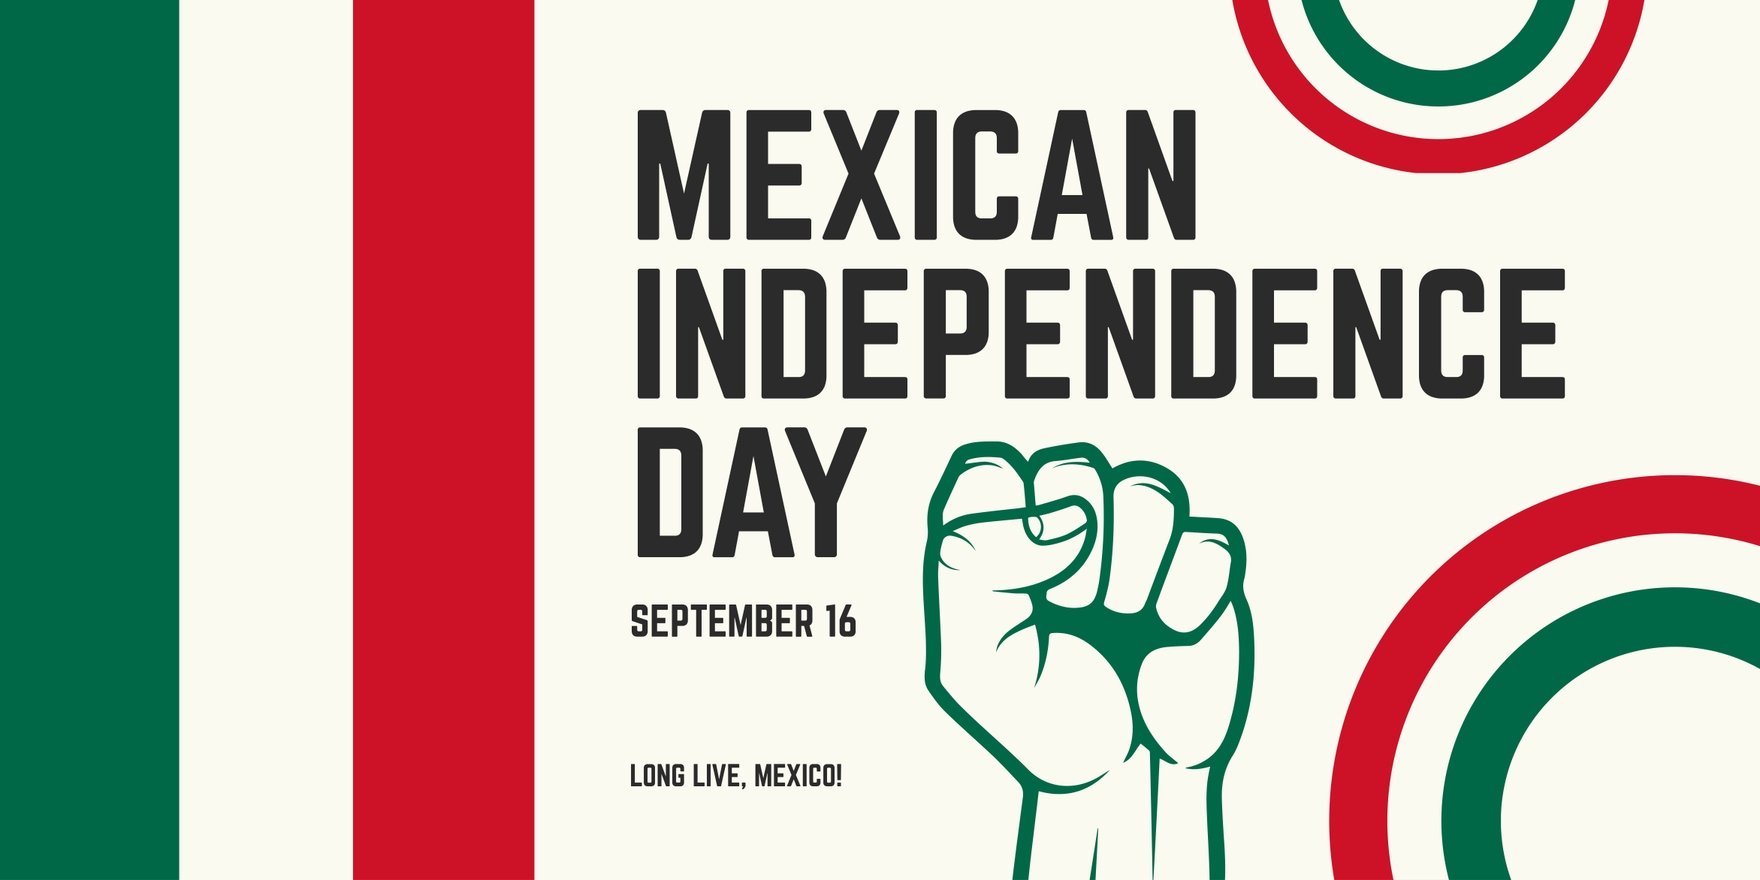 Modern Mexican Independence Day Banner in Illustrator, PSD, EPS, SVG, JPG, PNG